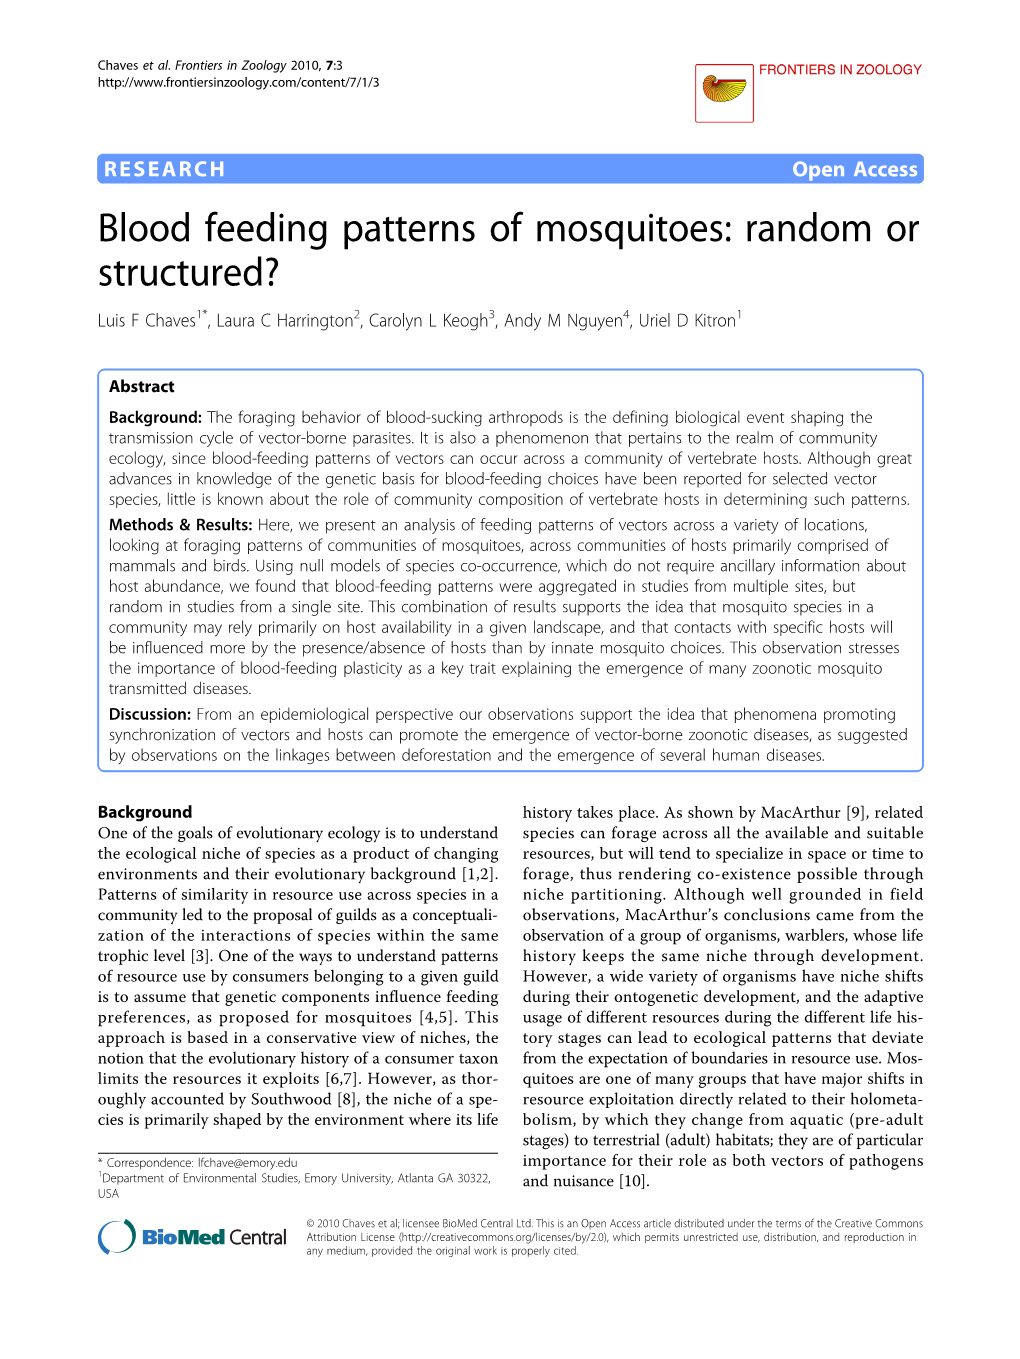 Blood Feeding Patterns of Mosquitoes: Random Or Structured? Luis F Chaves1*, Laura C Harrington2, Carolyn L Keogh3, Andy M Nguyen4, Uriel D Kitron1